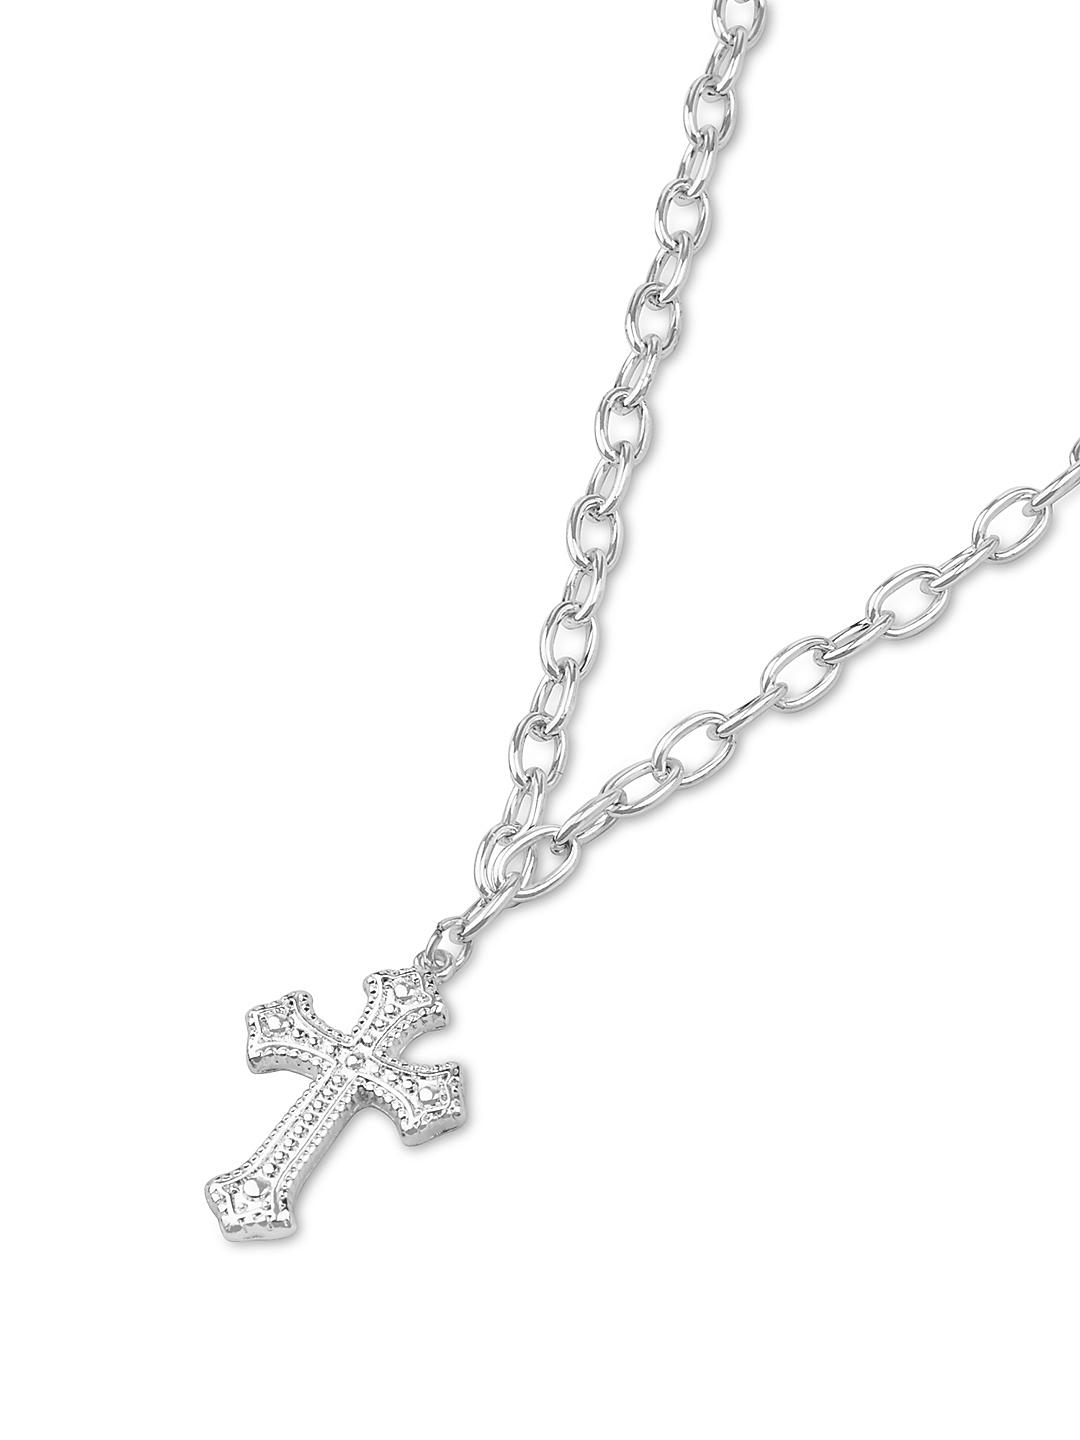 Light Weight Fancy Daily Wear Gold Plated Cross Pendant at Best Price in  Chennai | Regaliaz